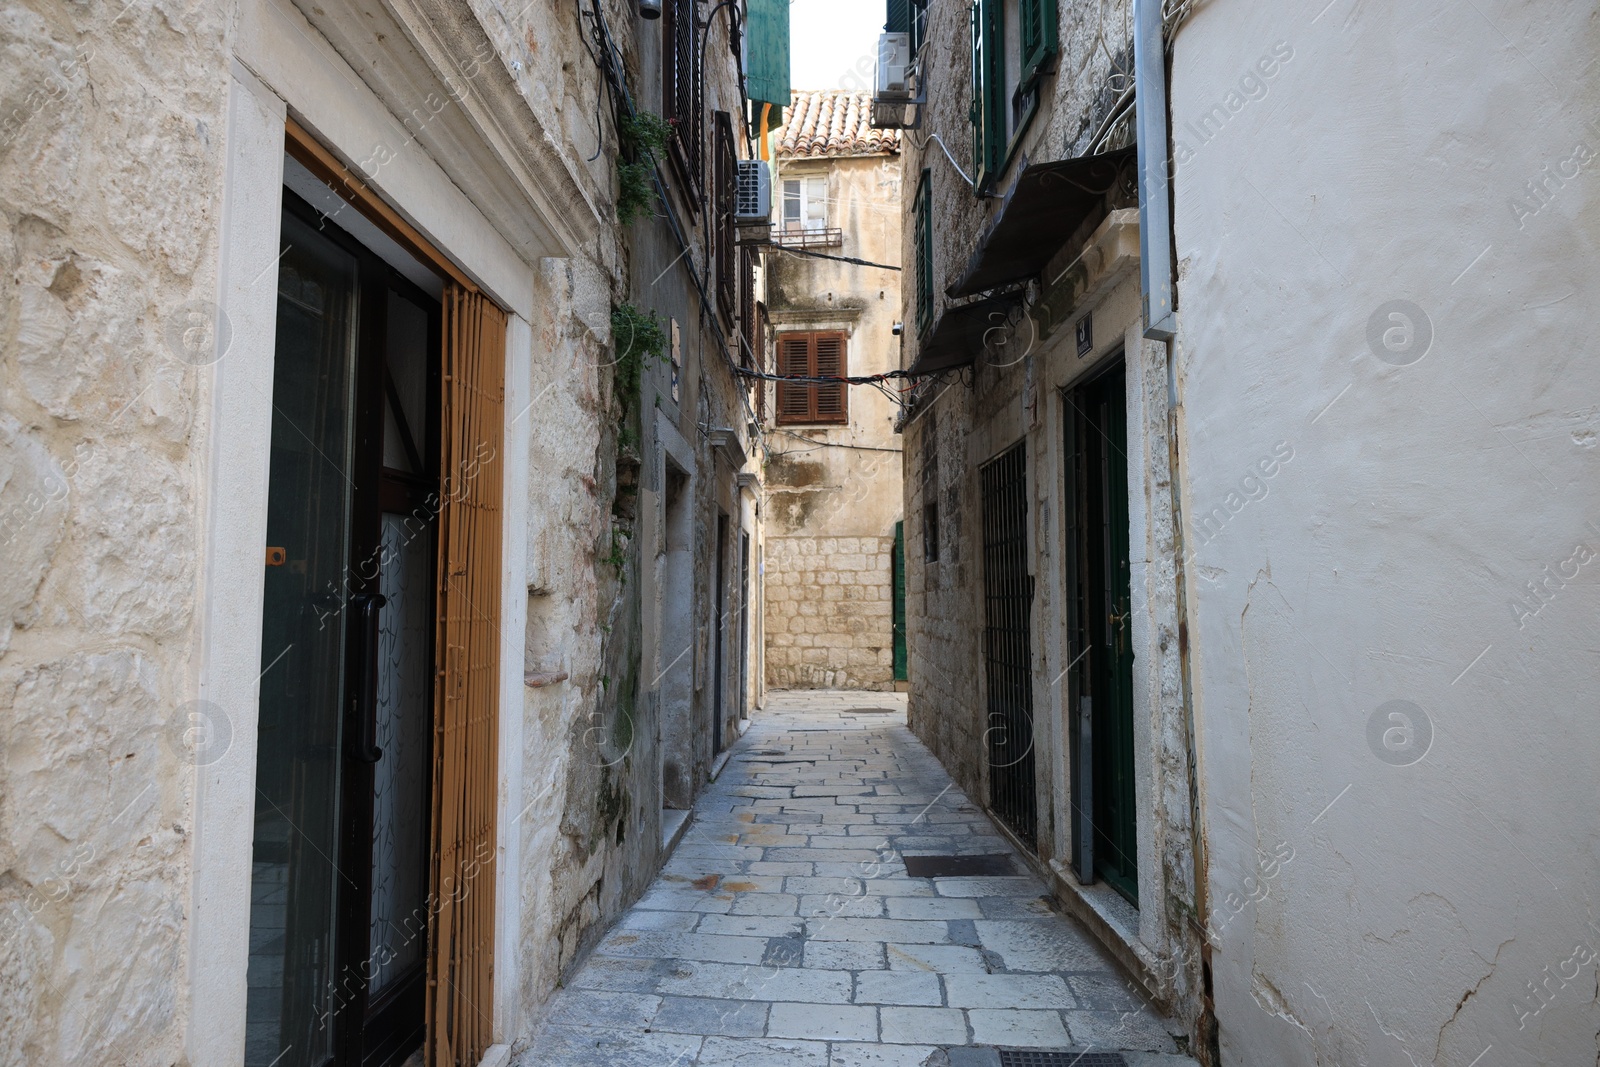 Photo of Empty street with passage between old buildings